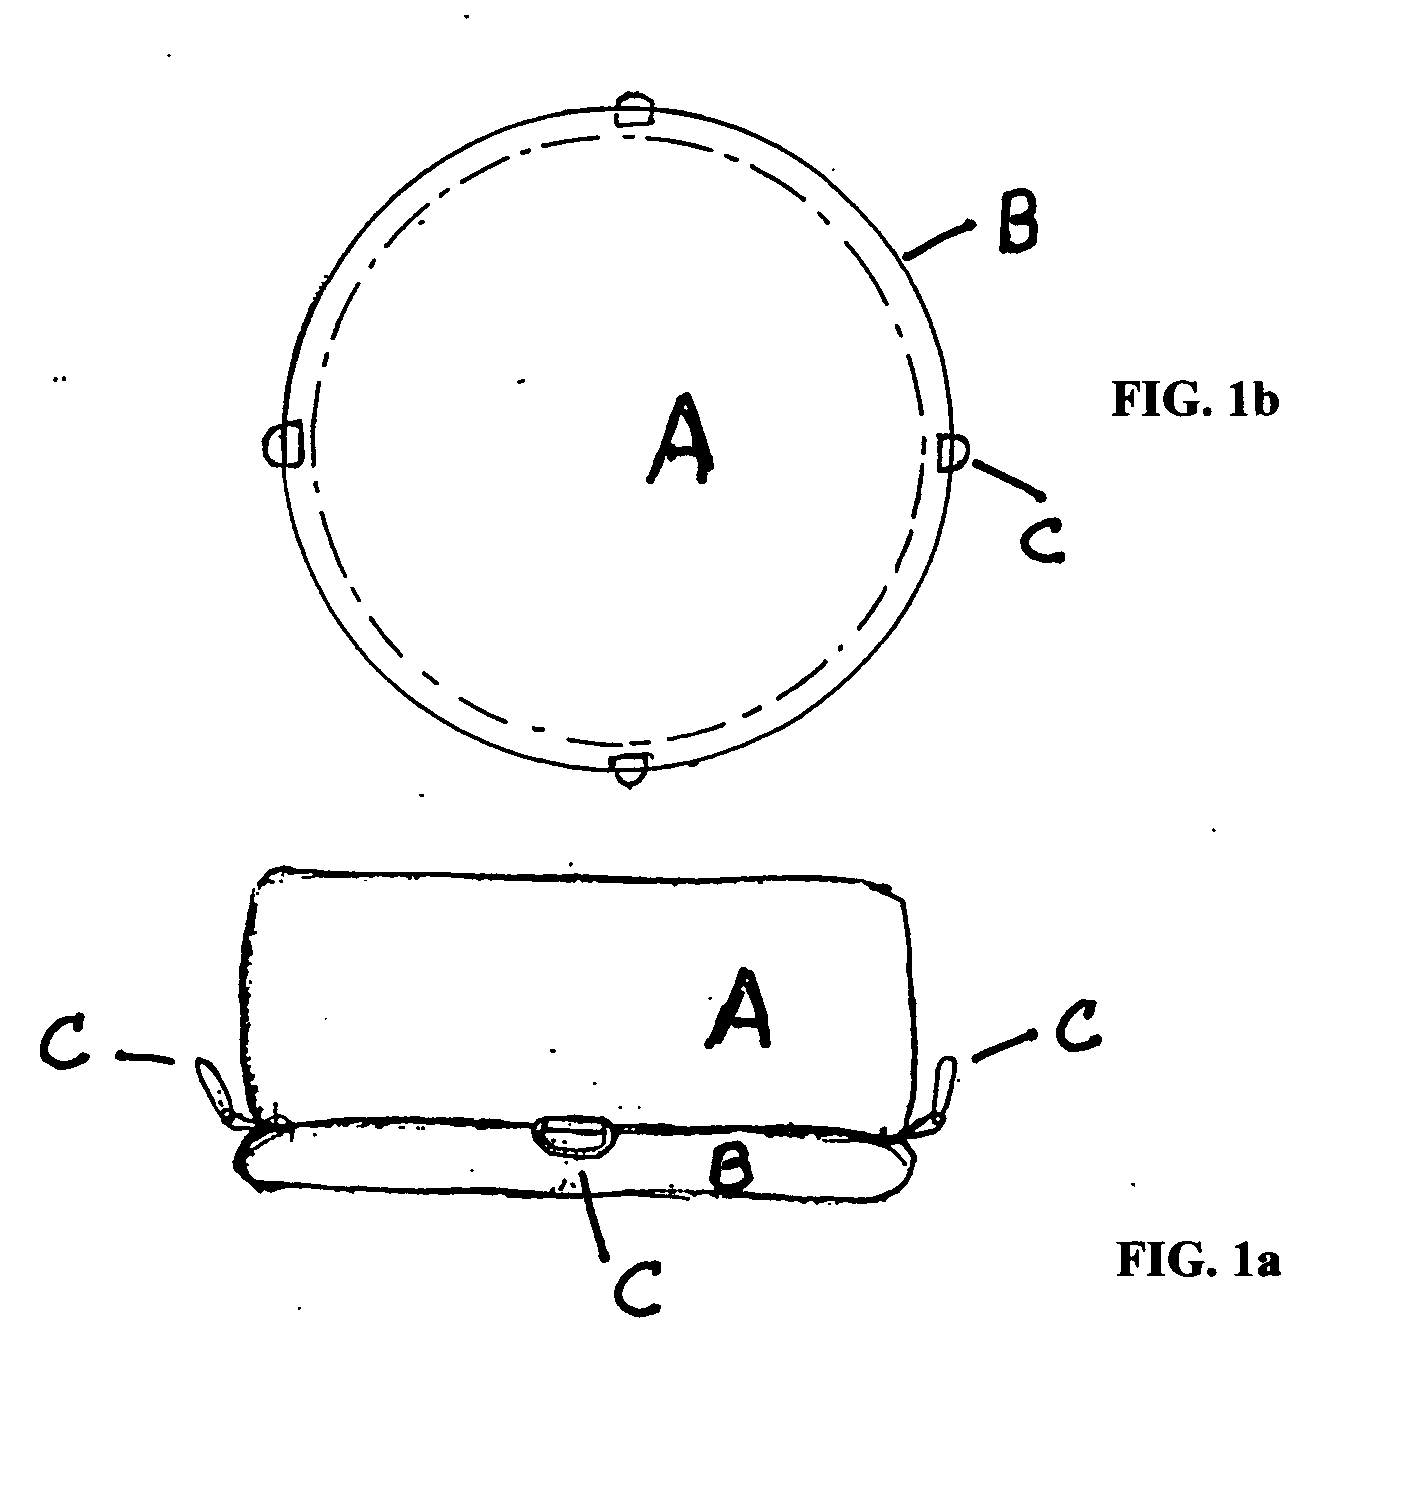 Multi-functional mobile seat platform apparatus for relieving aches or pains while working